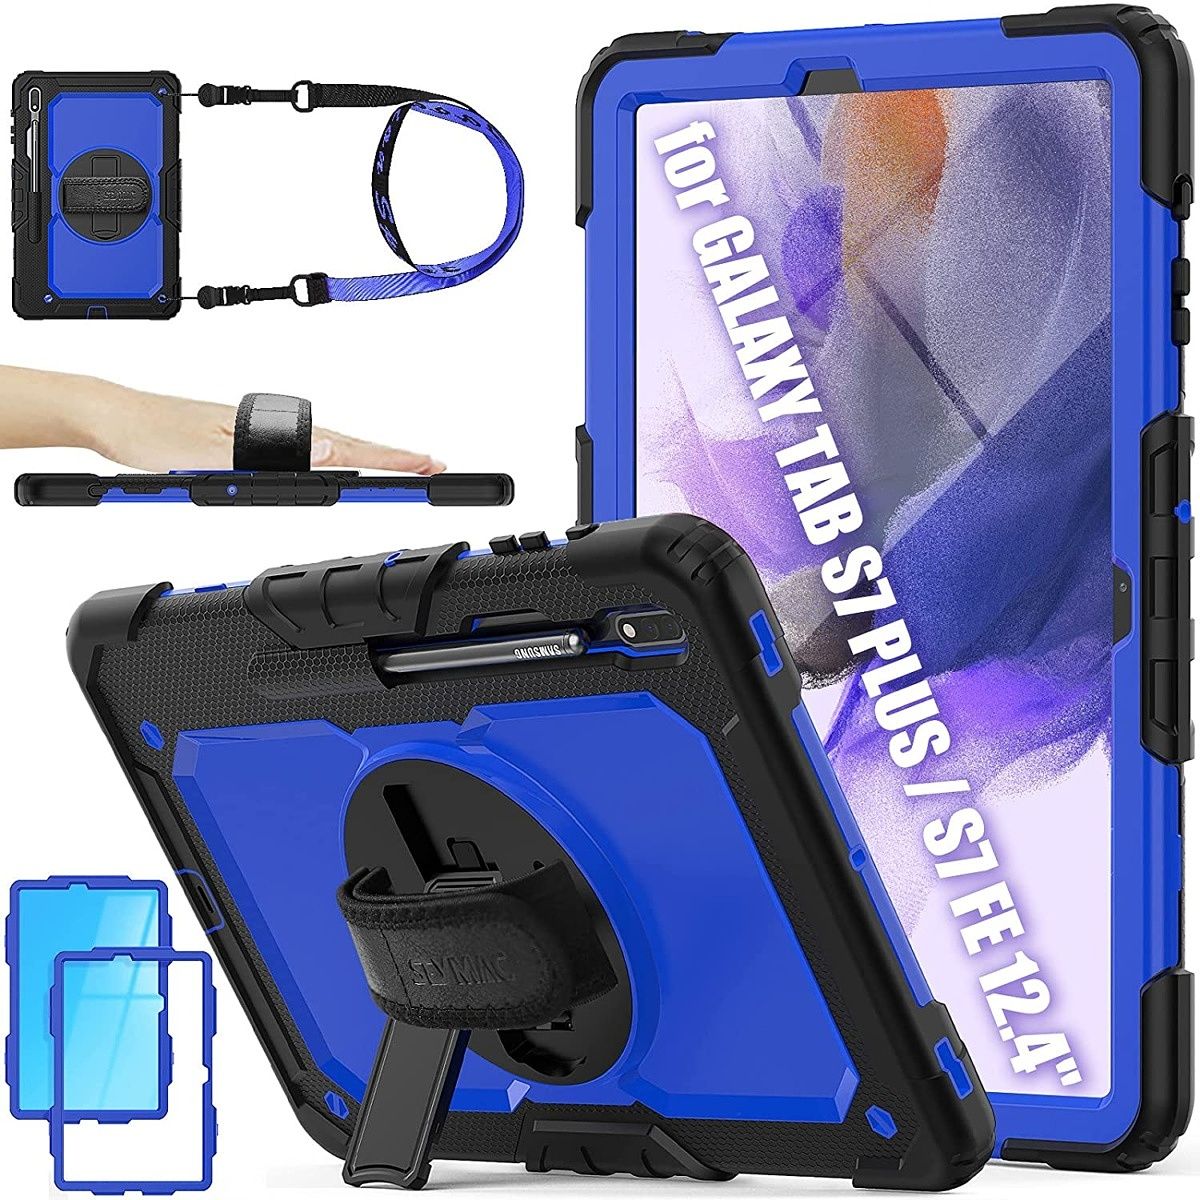 If you want to go overboard with protection, this case is for you. It's thick and rugged, has a screen protector, and a hand strap at the back.